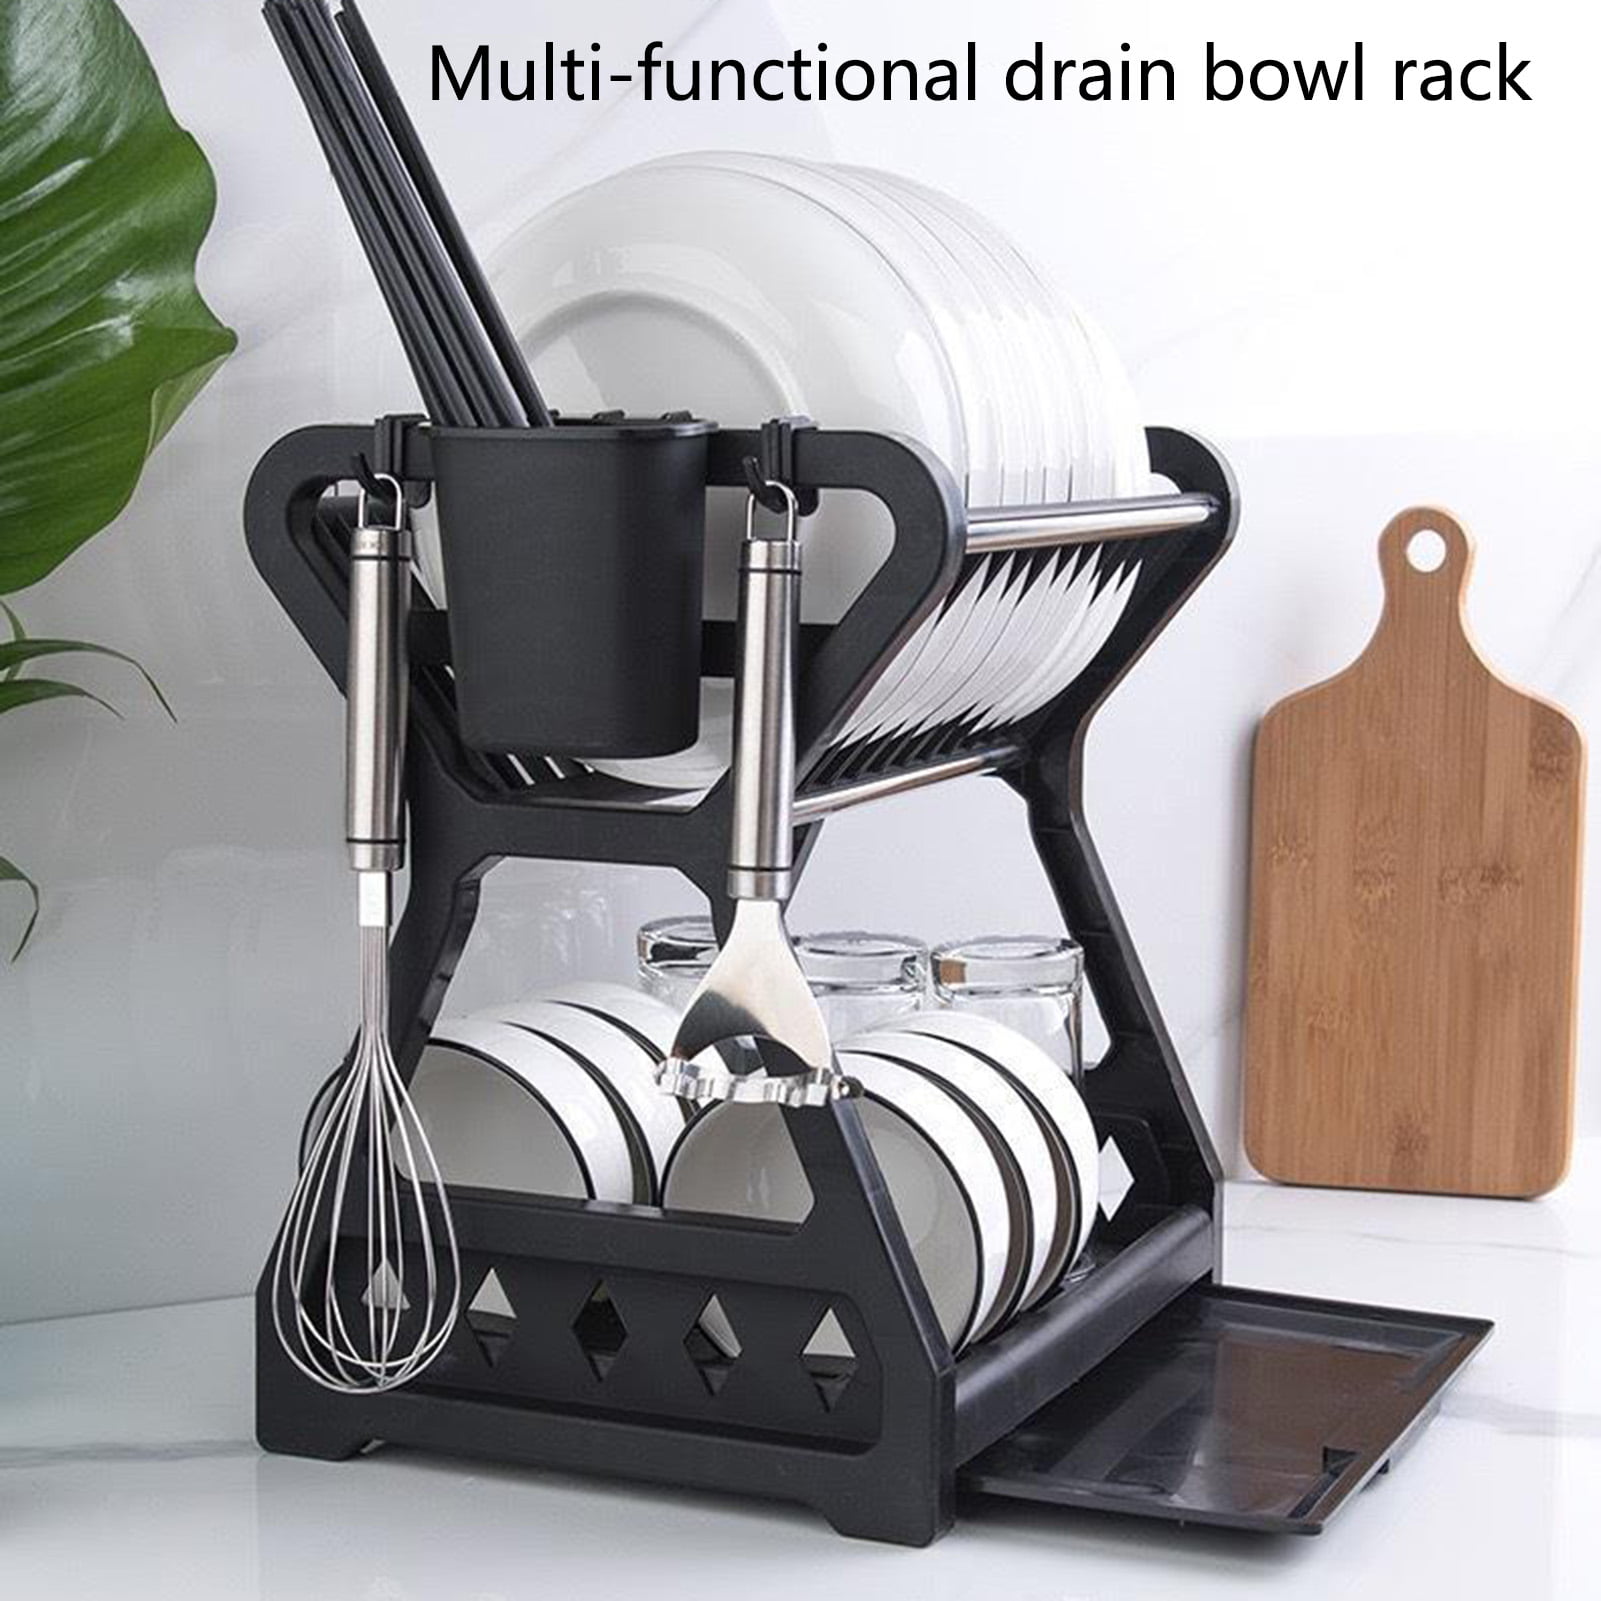 Vearear Dish Storage Rack Drain Design Rust-proof Save Space Long Time Use Not Easy to Be Damaged Keep Dishes Dry/Clean Non-Slip Multifunctional Dish